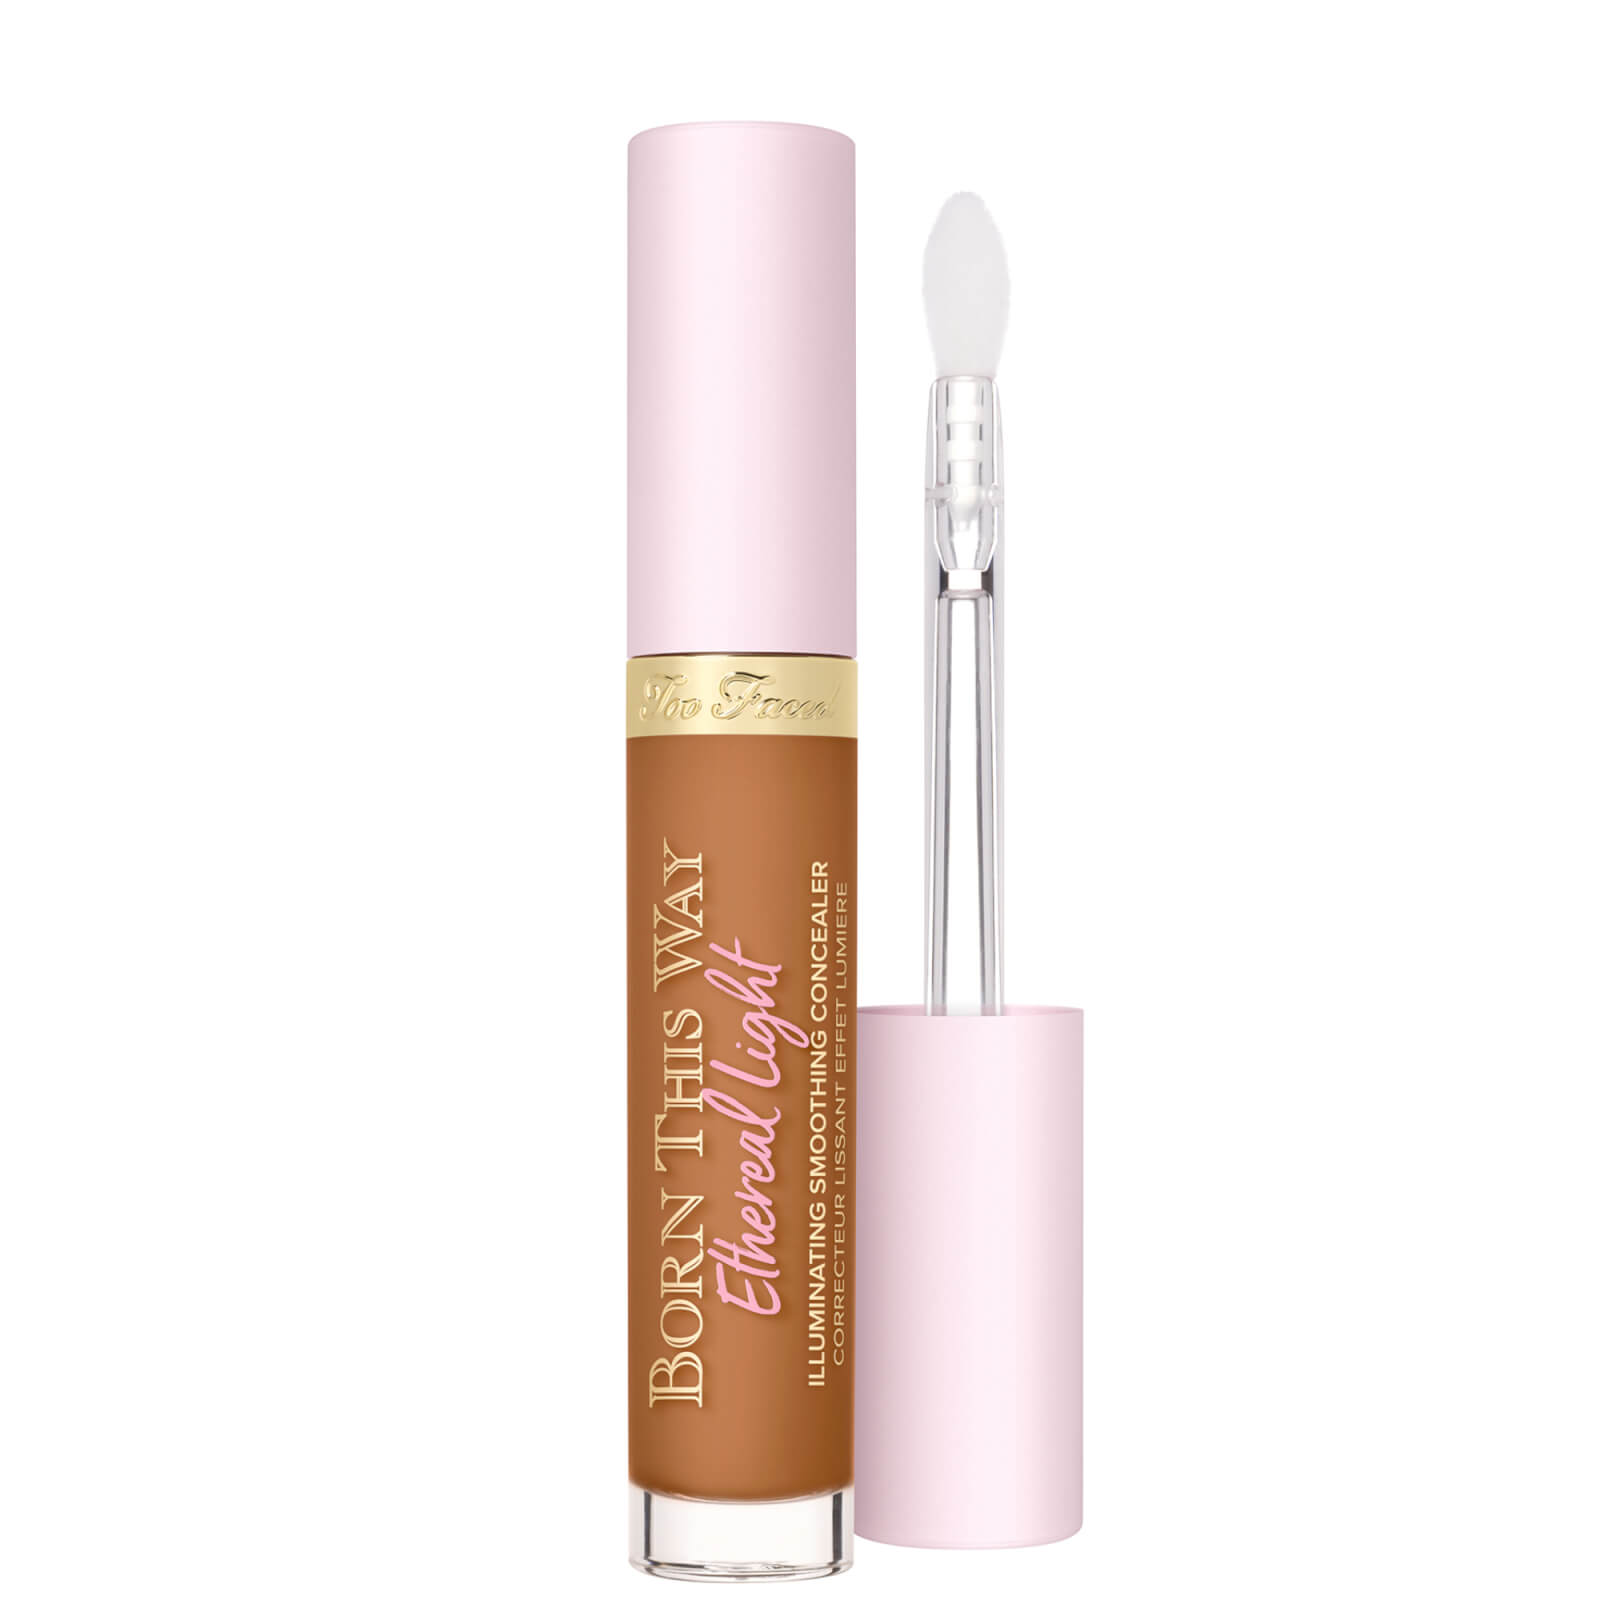 Too Faced Born This Way Ethereal Light Illuminating Smoothing Concealer 15ml (Various Shades) - Hone